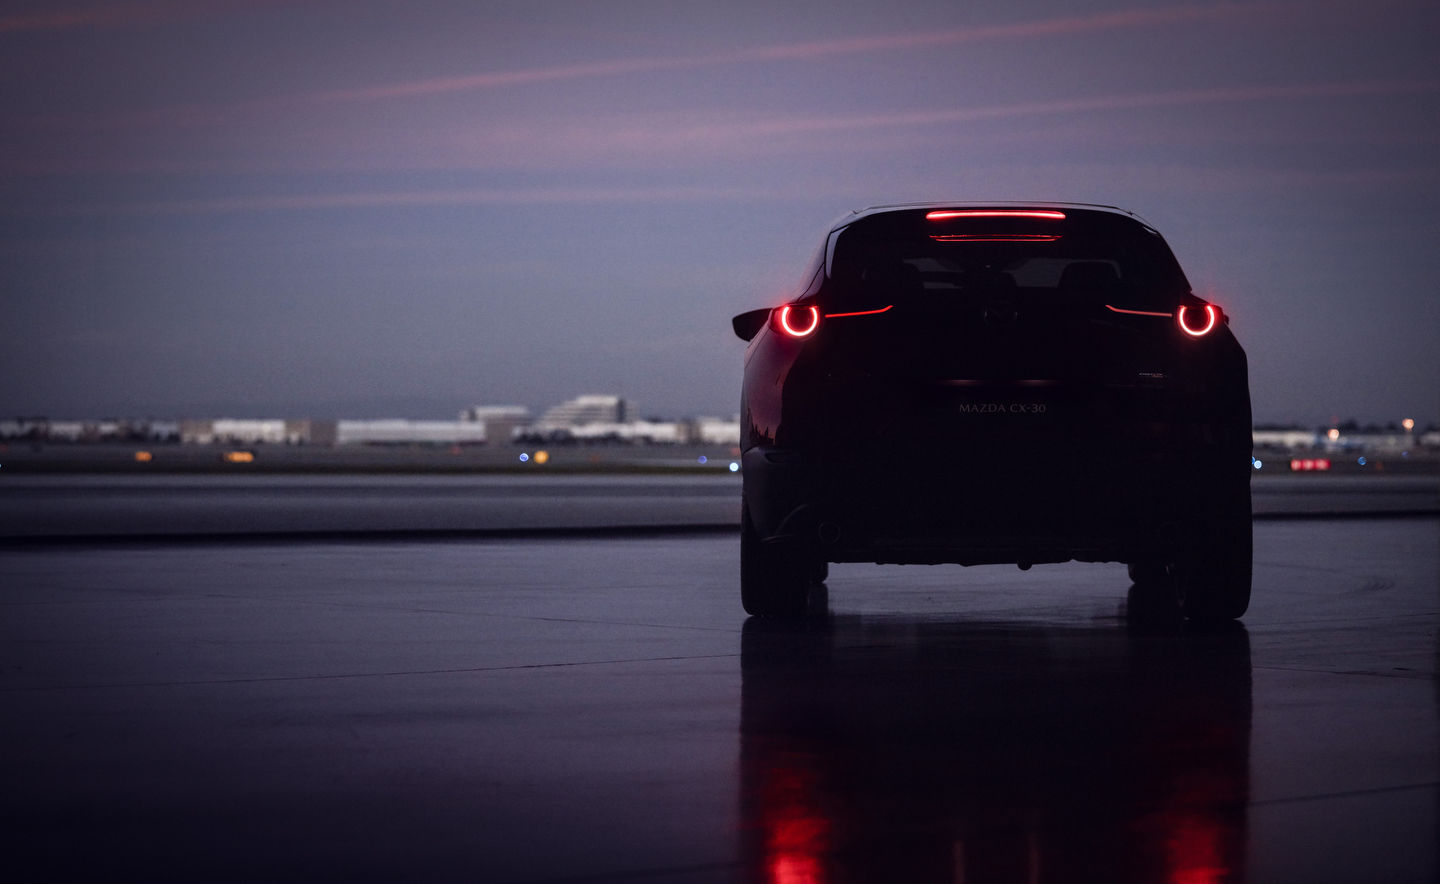 Mazda announces full lineup of new sport utility vehicles coming next year starting with CX-50